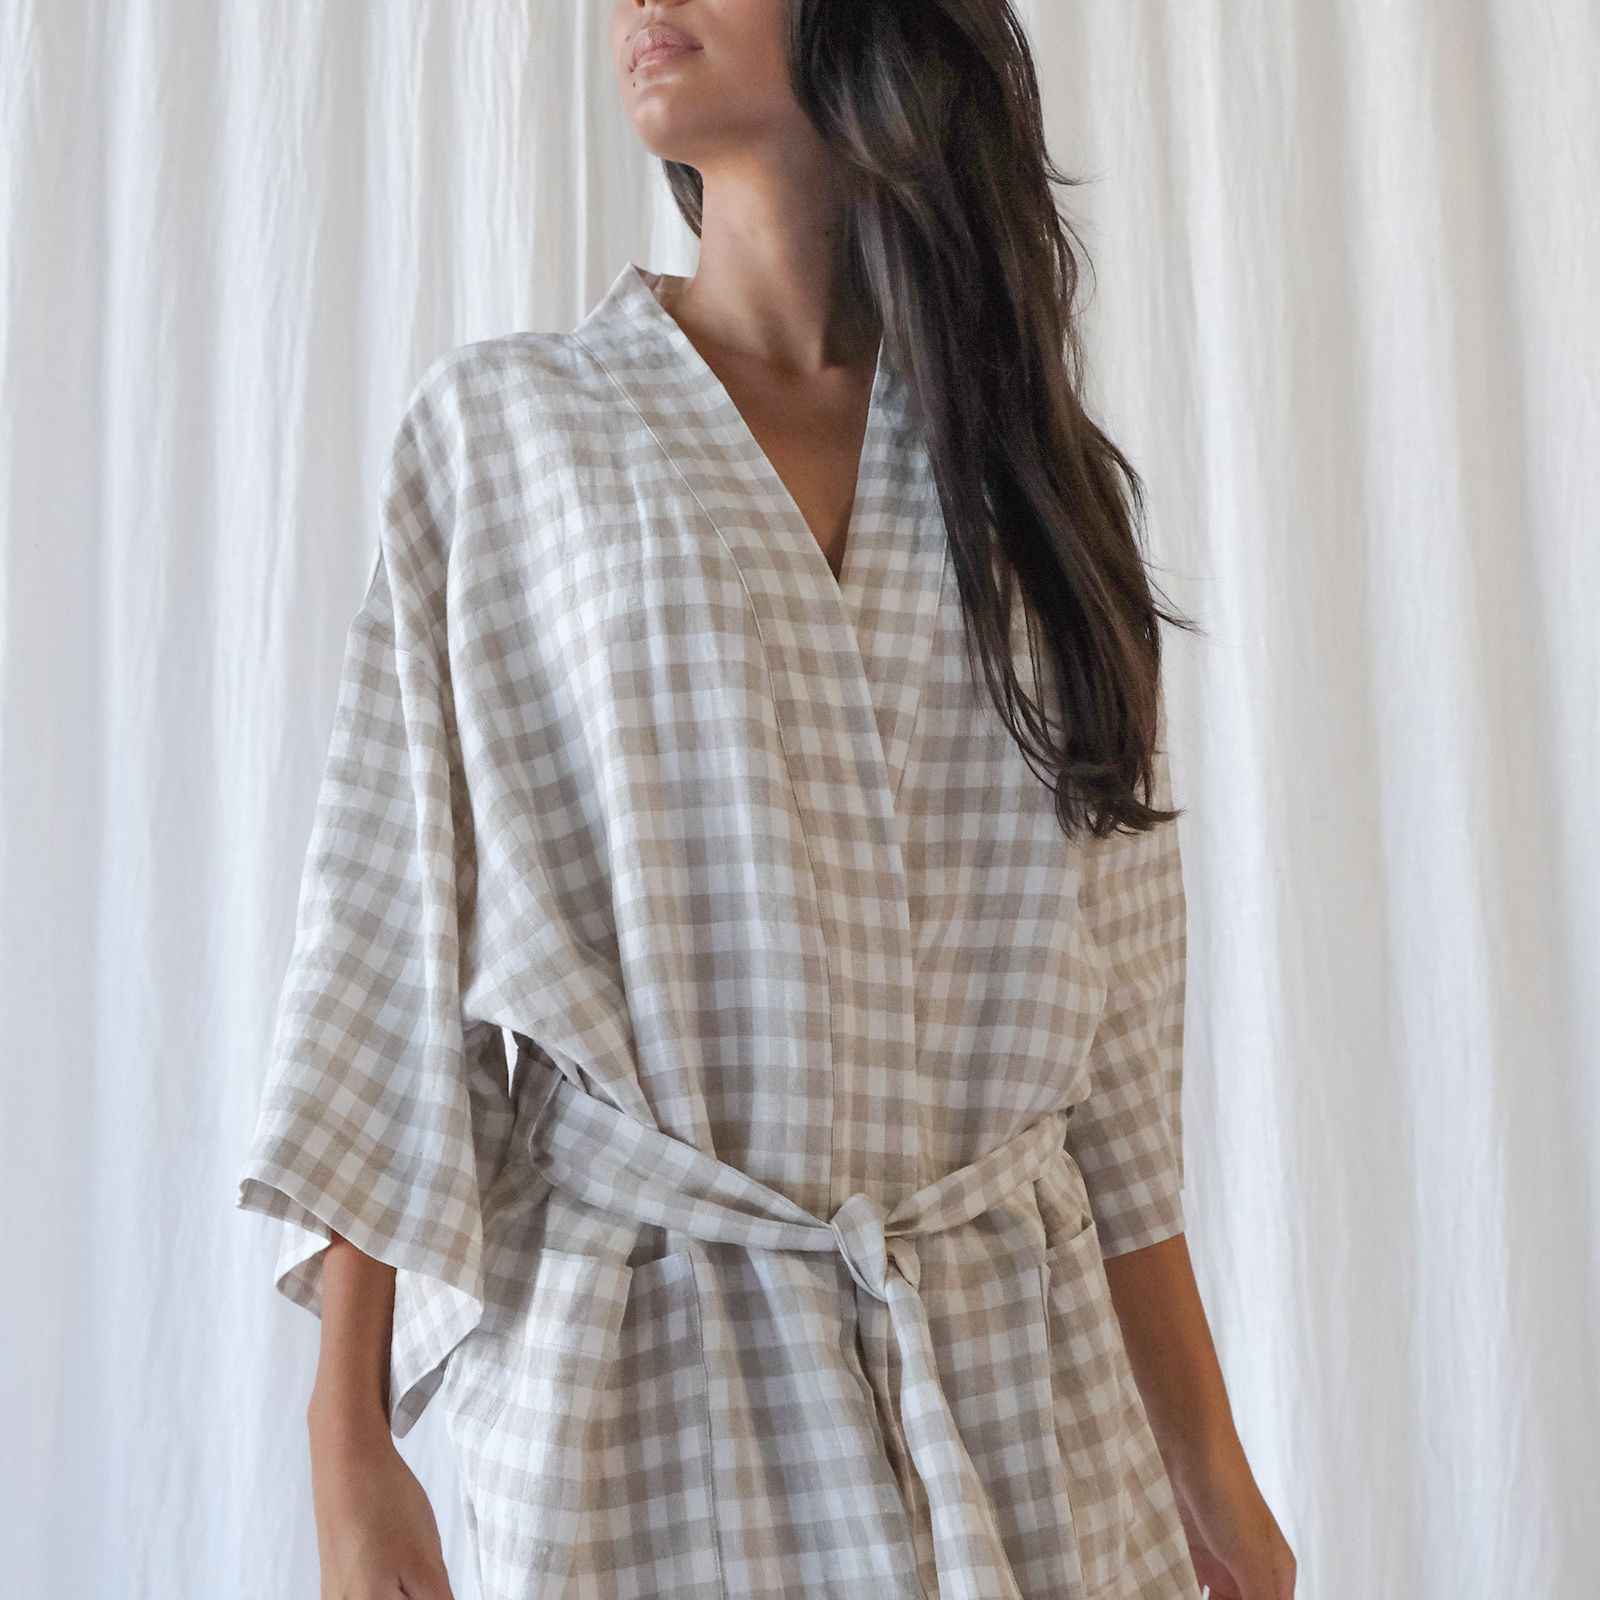 French Linen Robe in Beige Gingham